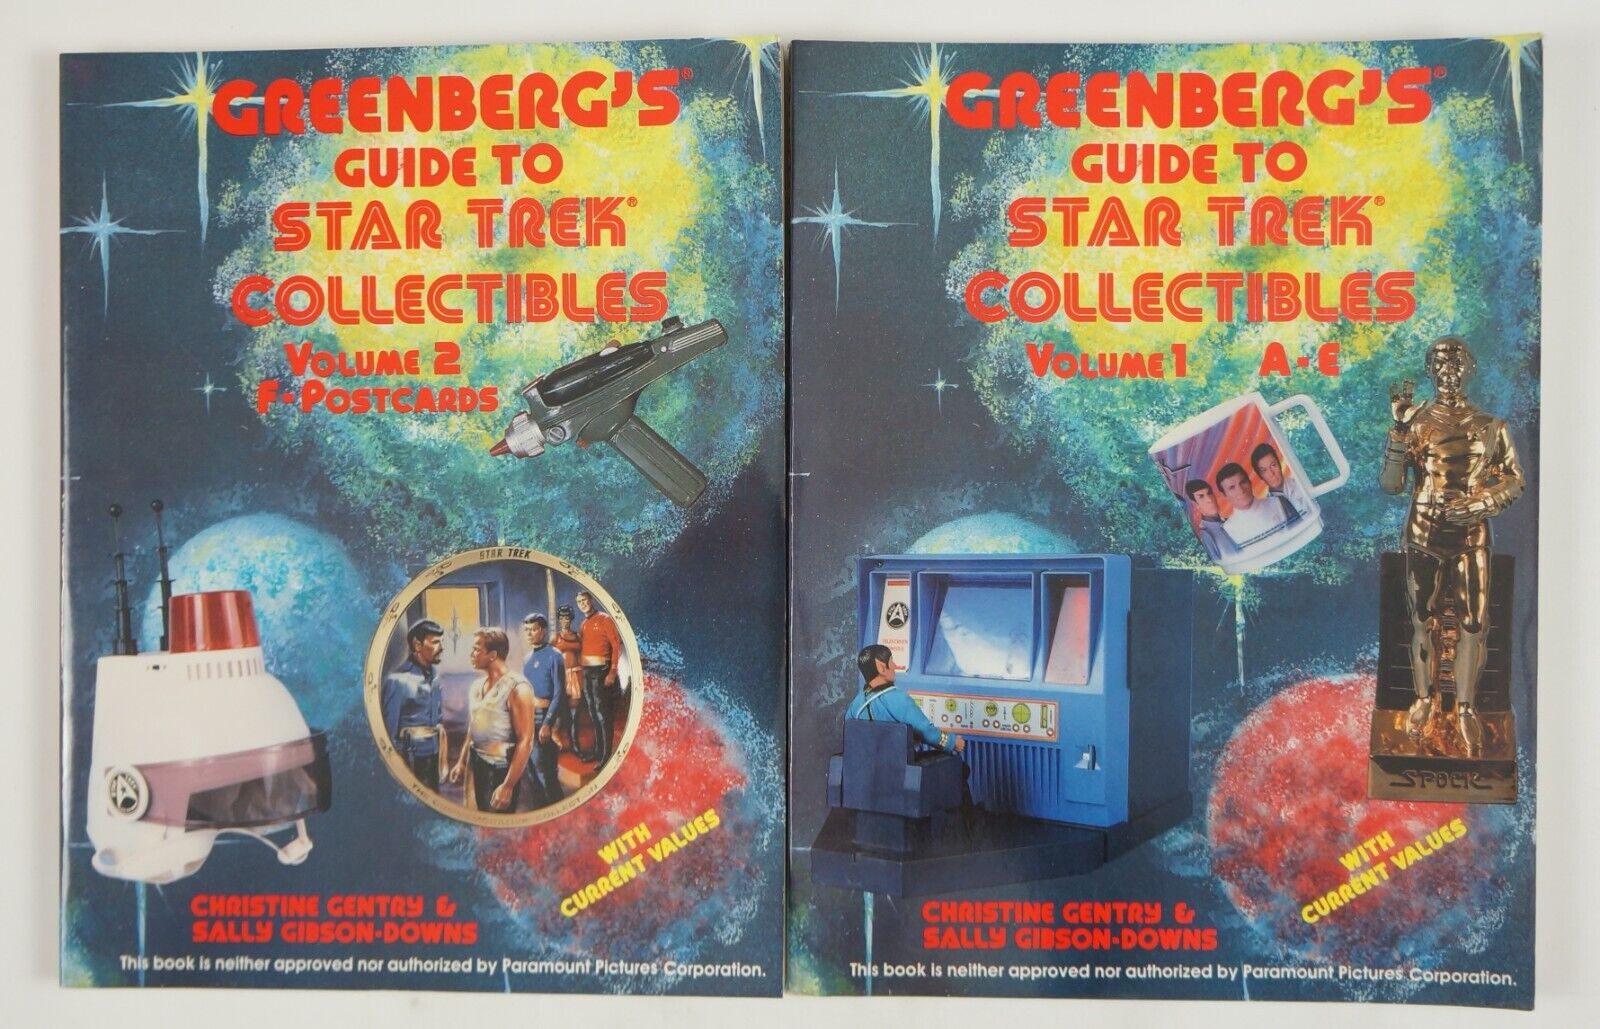 Greenberg\'s Guide to Star Trek Collectibles Volume 1: A-E & 2: F-Postcards 1991